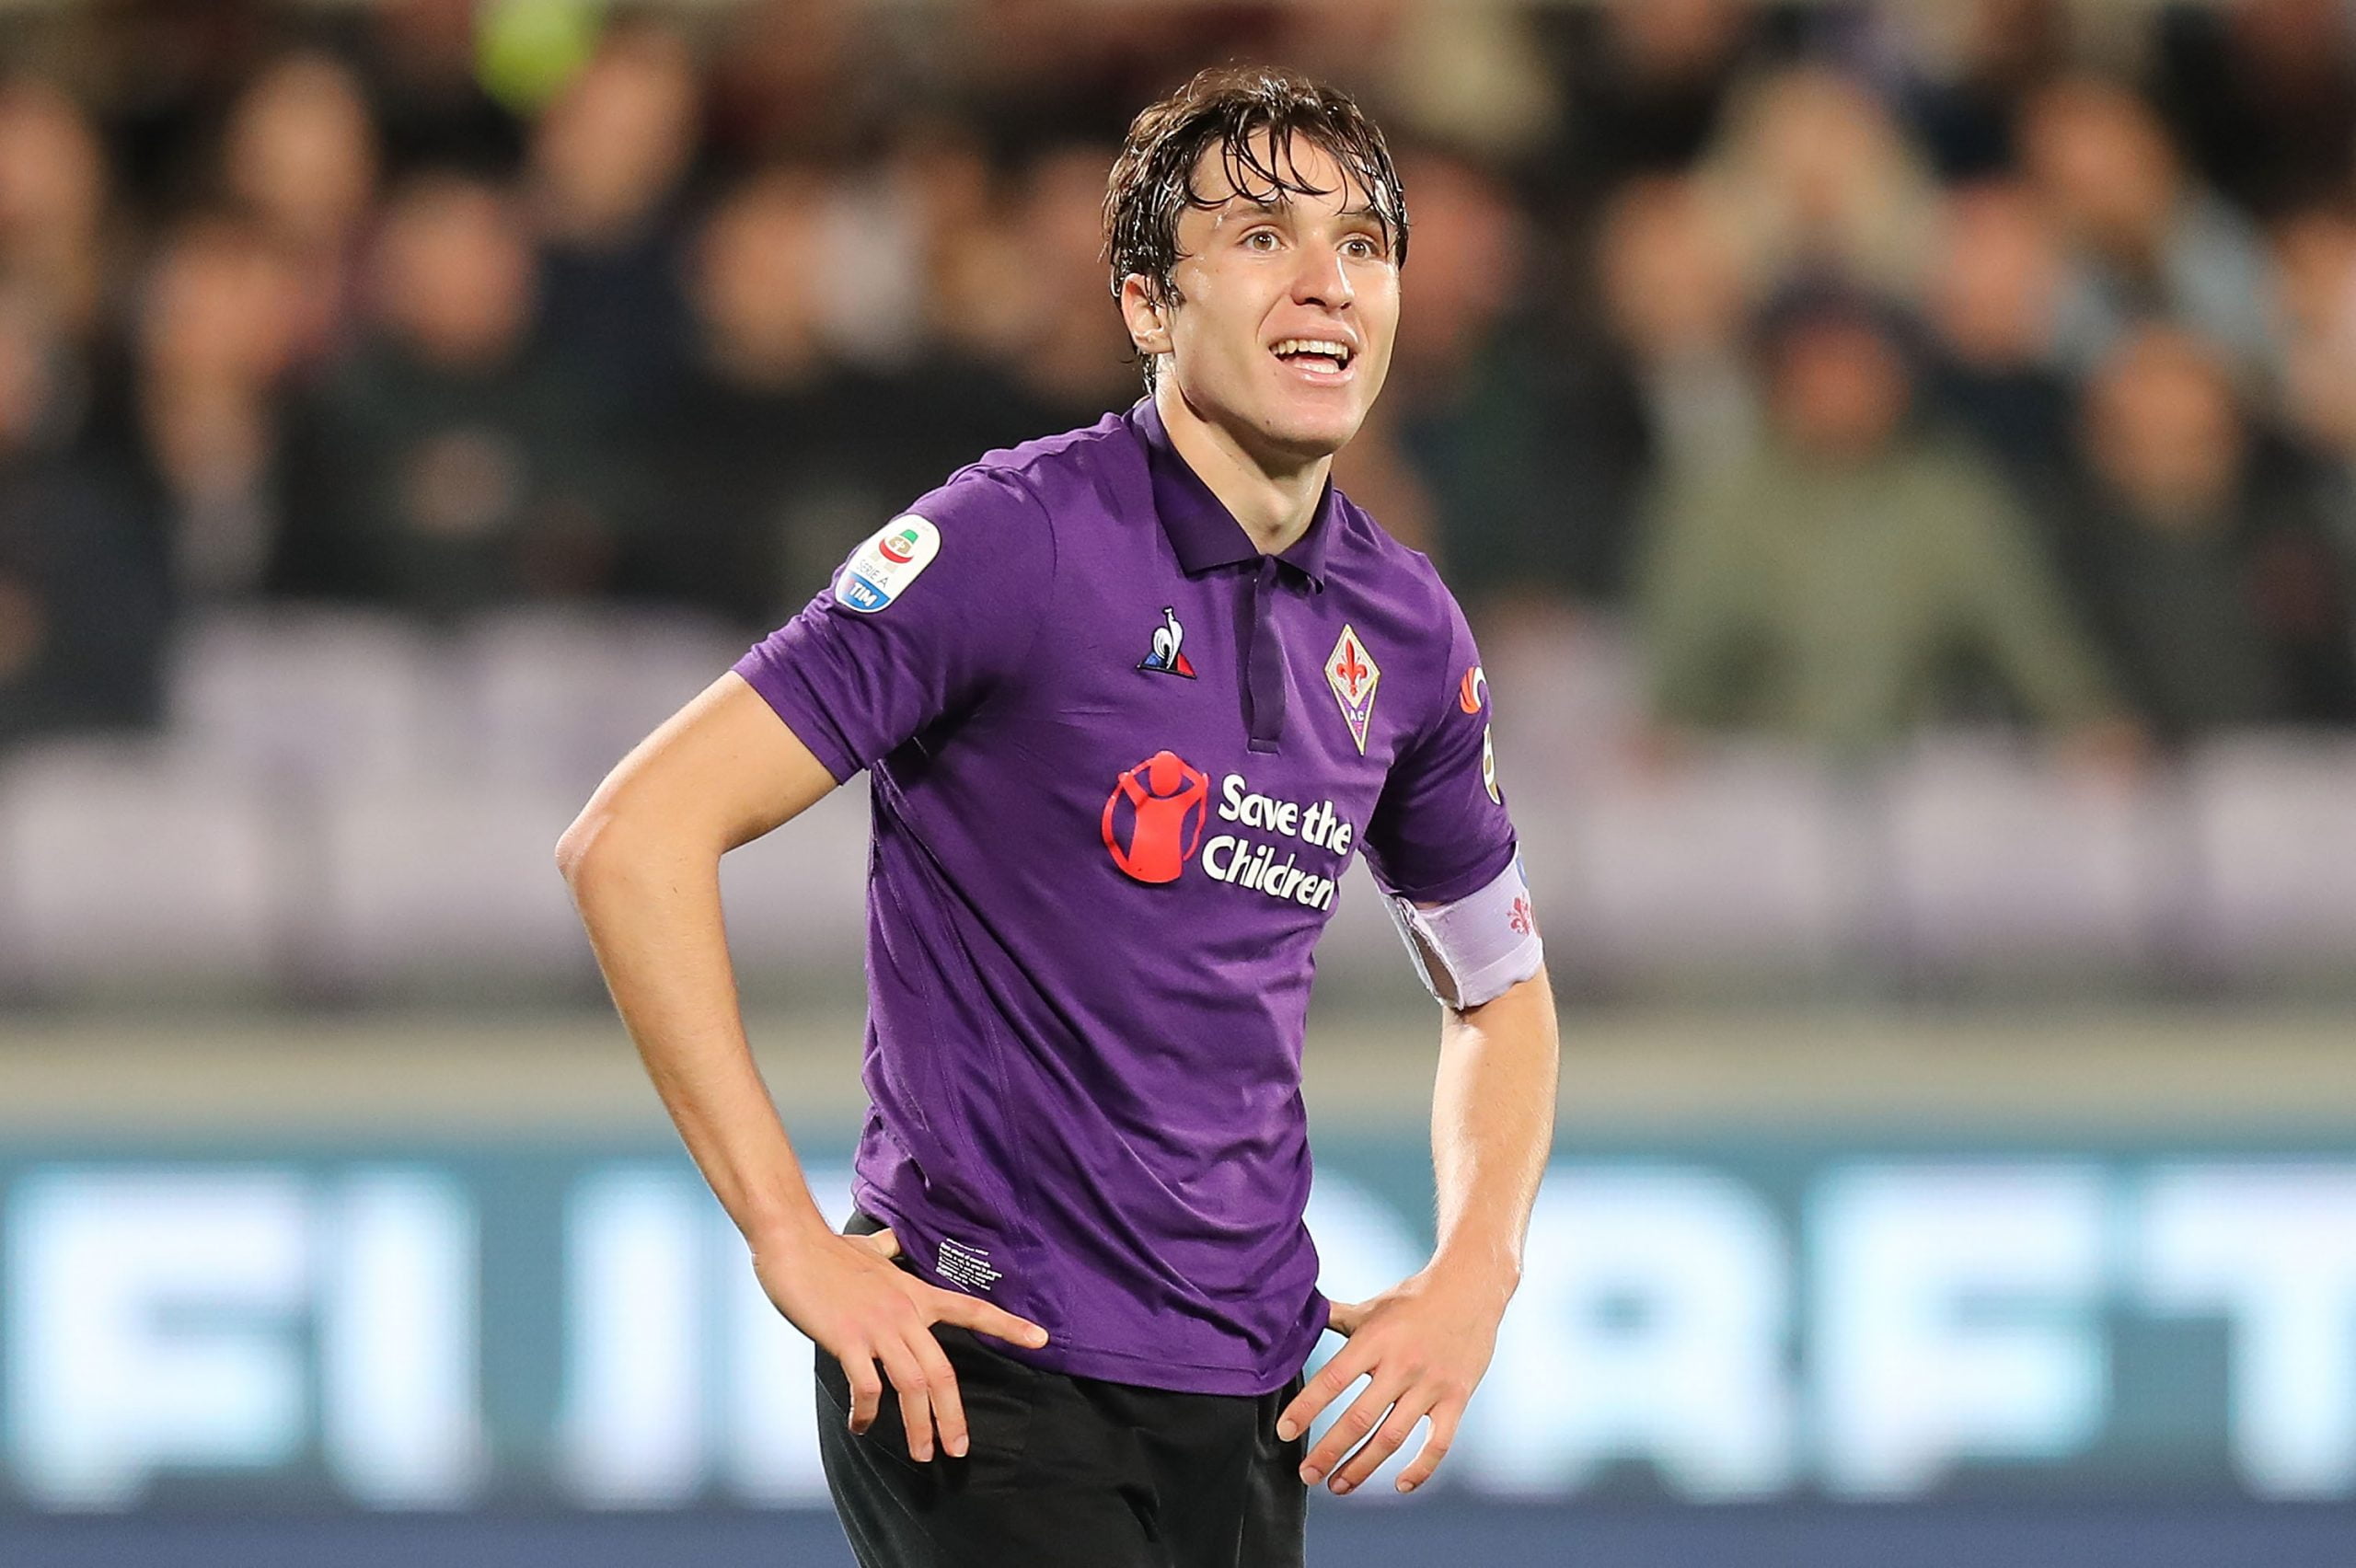 Federico Chiesa of ACF Fiorentina reacts during the Serie A match between ACF Fiorentina and AC Milan at Stadio Artemio Franchi on May 11, 2019 in Florence, Italy.  (Photo by Gabriele Maltinti/Getty Images)